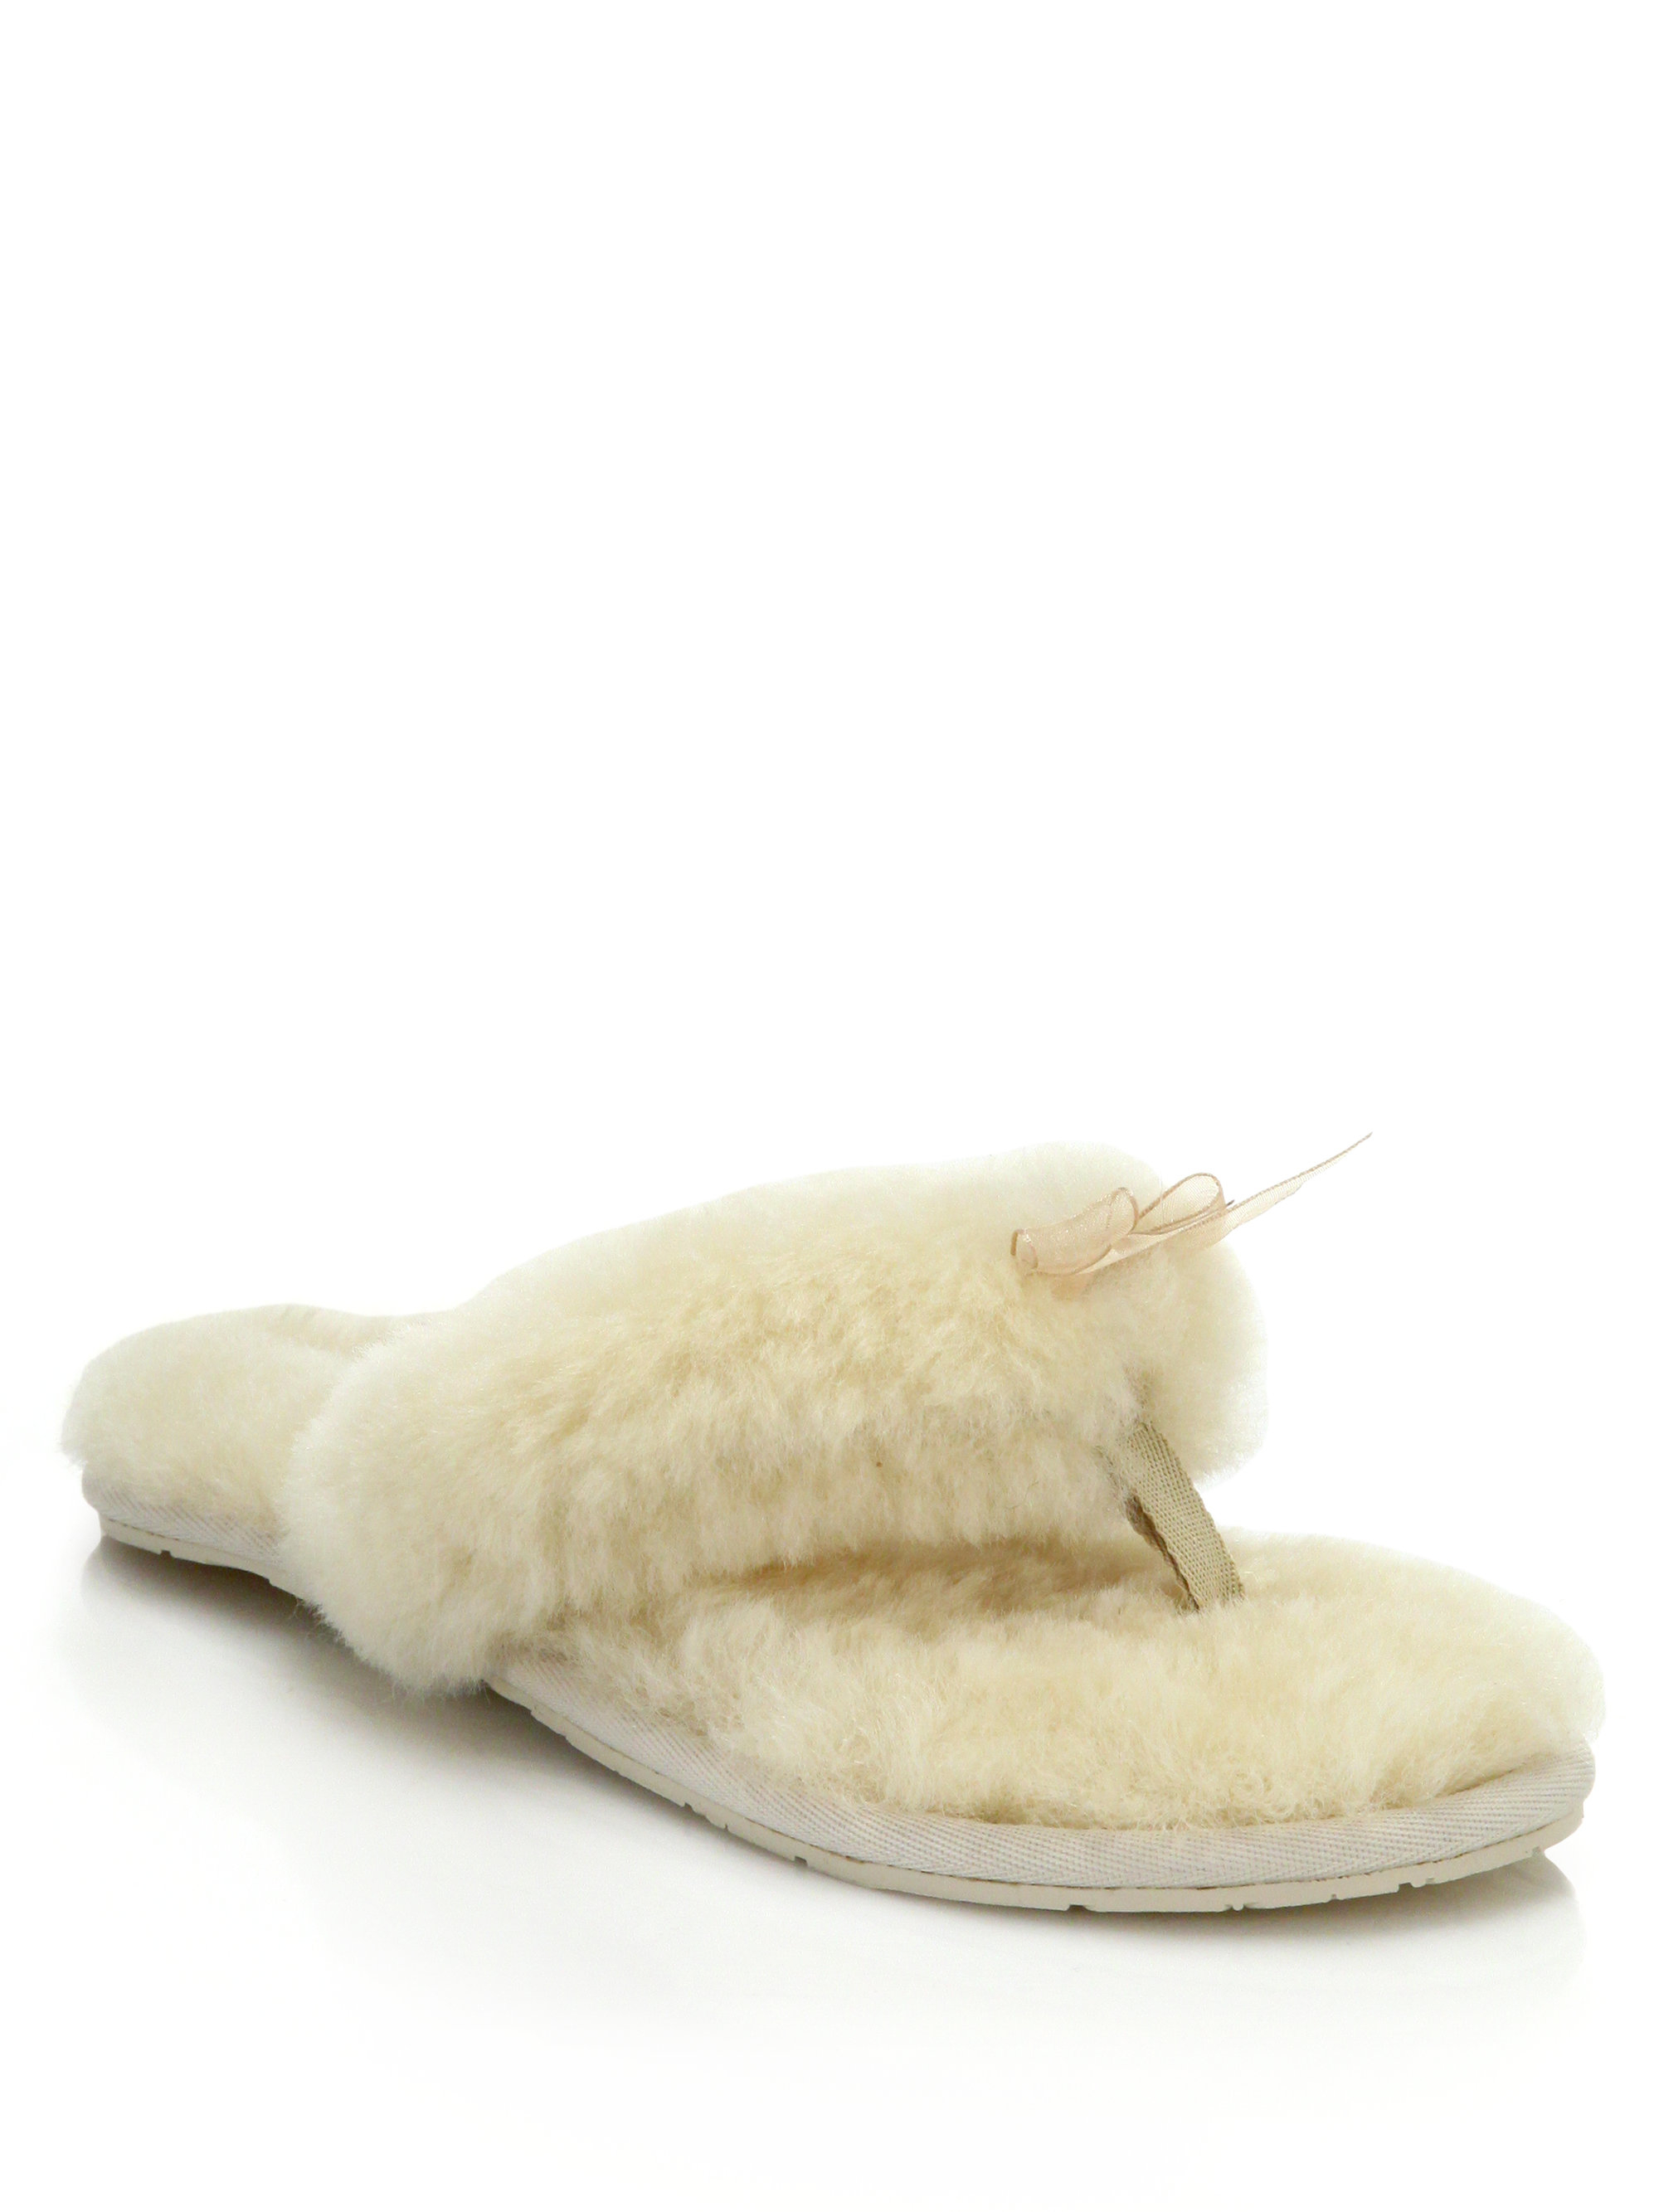 thong slippers ugg